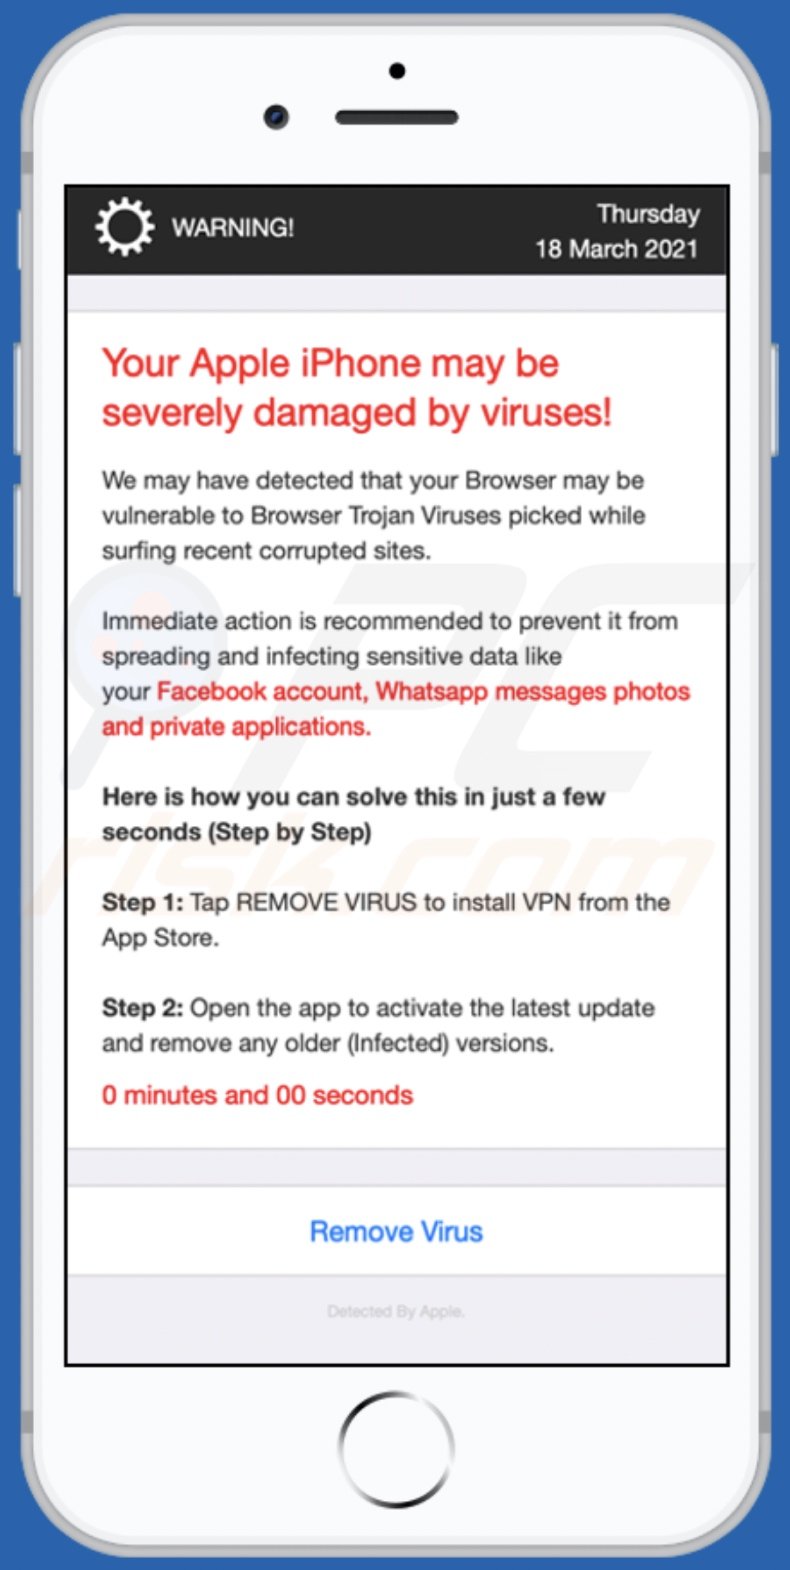 Your Apple iPhone may be severely damaged by viruses! oplichterij achtergrond pagina